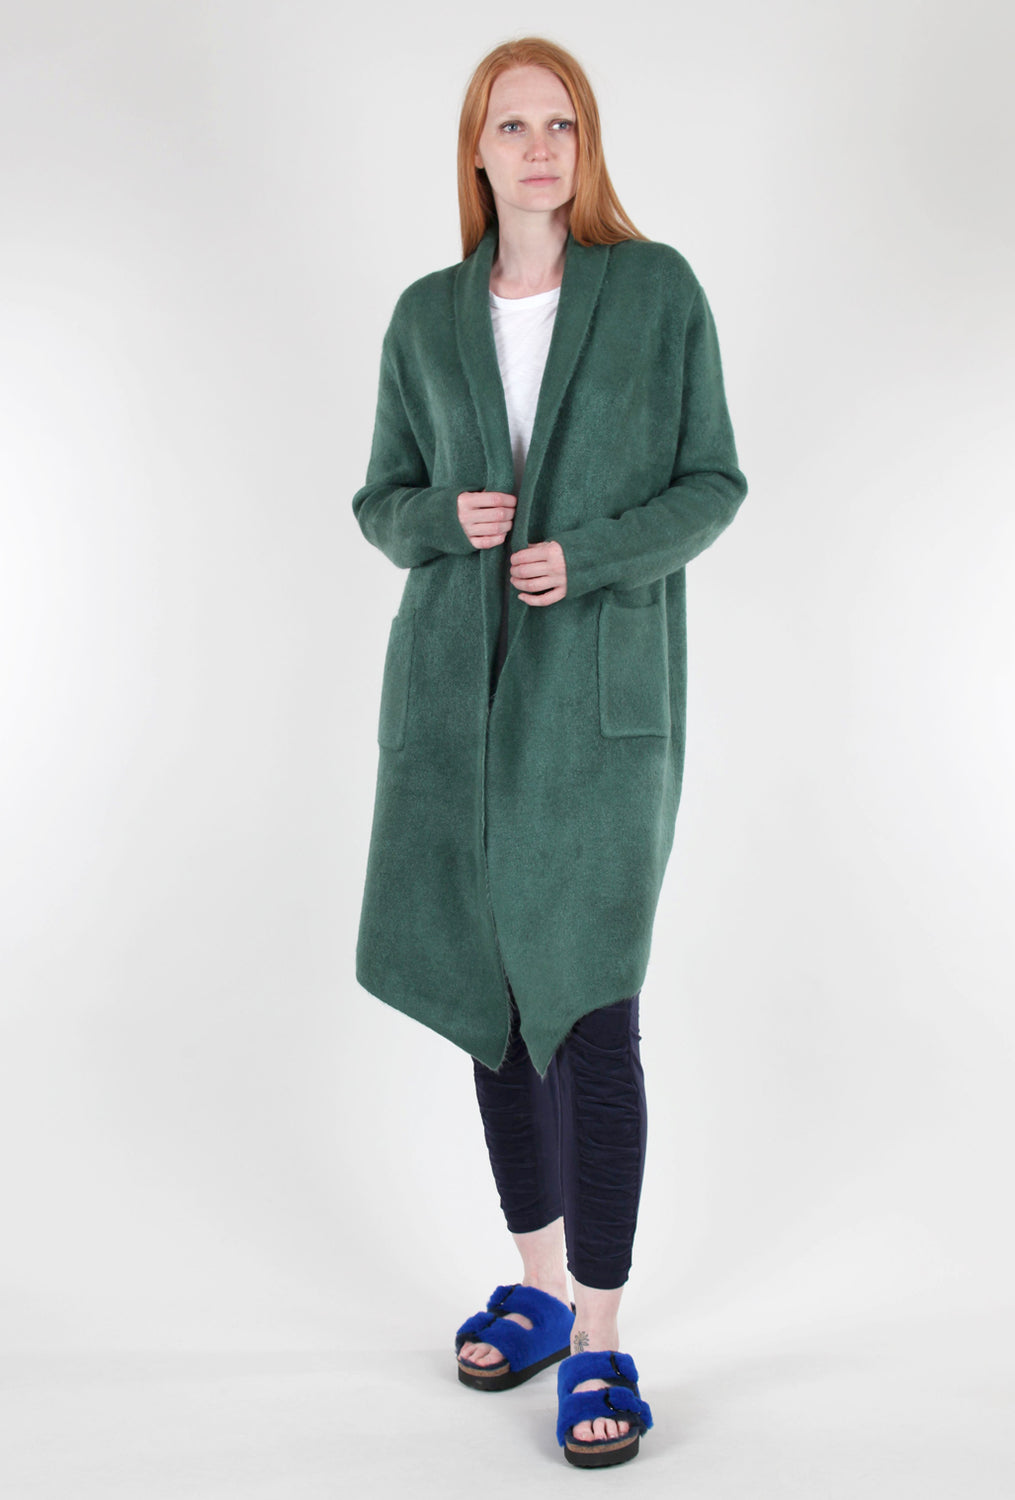 Pink Martini The Stockport Jacket, Green 